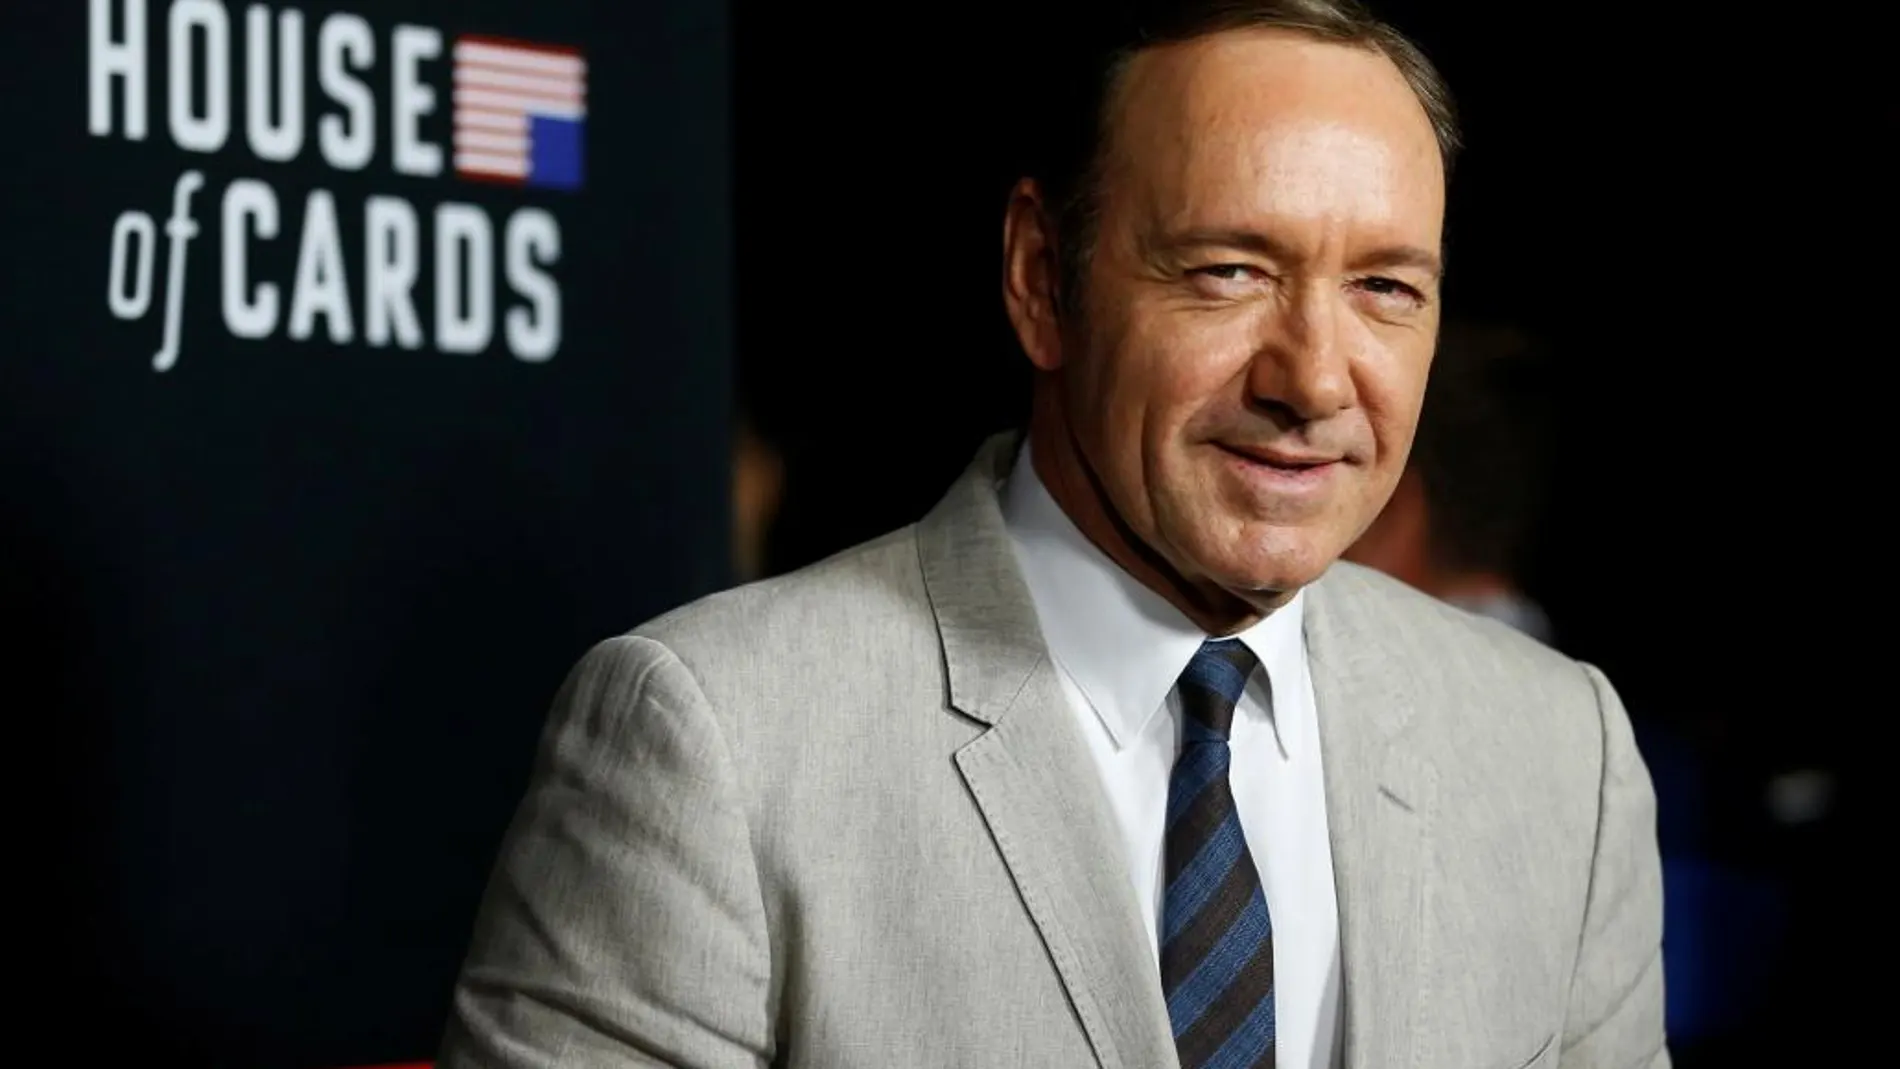 Kevin Spacey/REUTERS